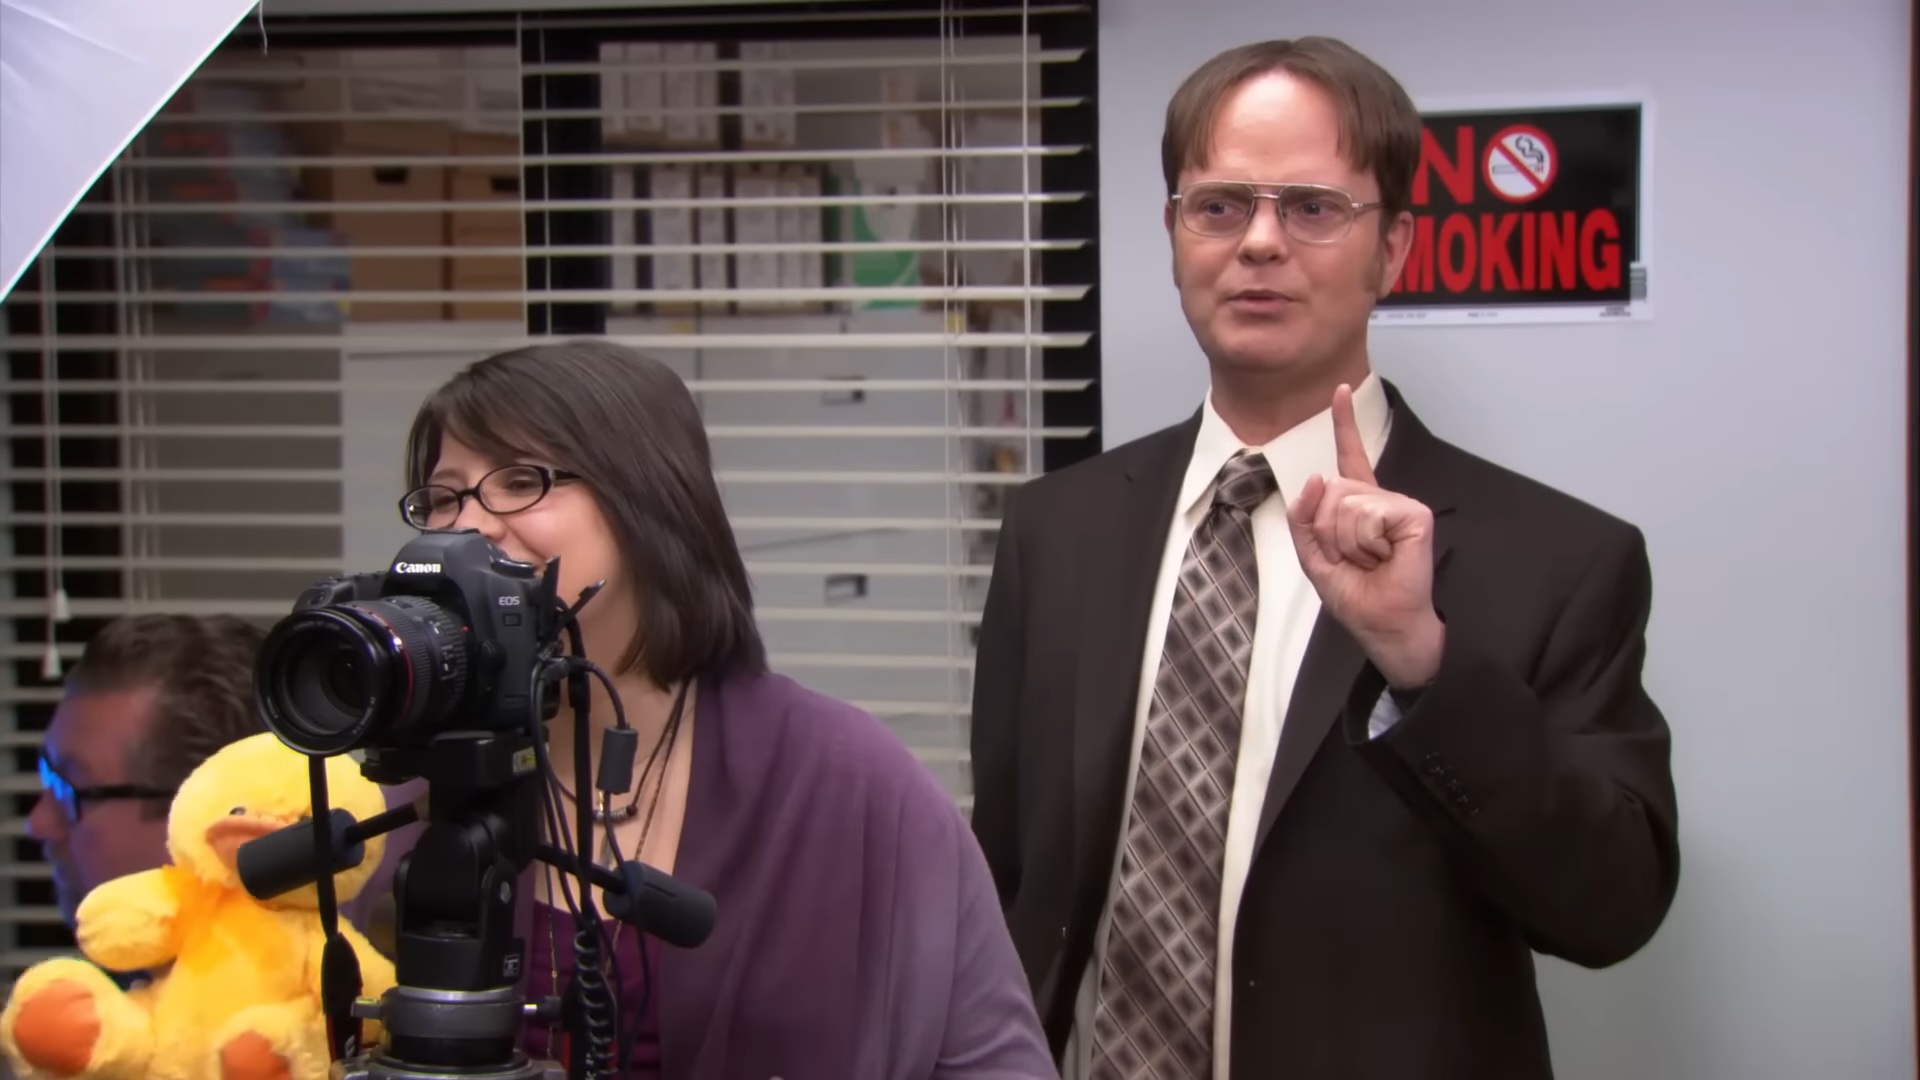 Dwight and a female photographer in "The Office."